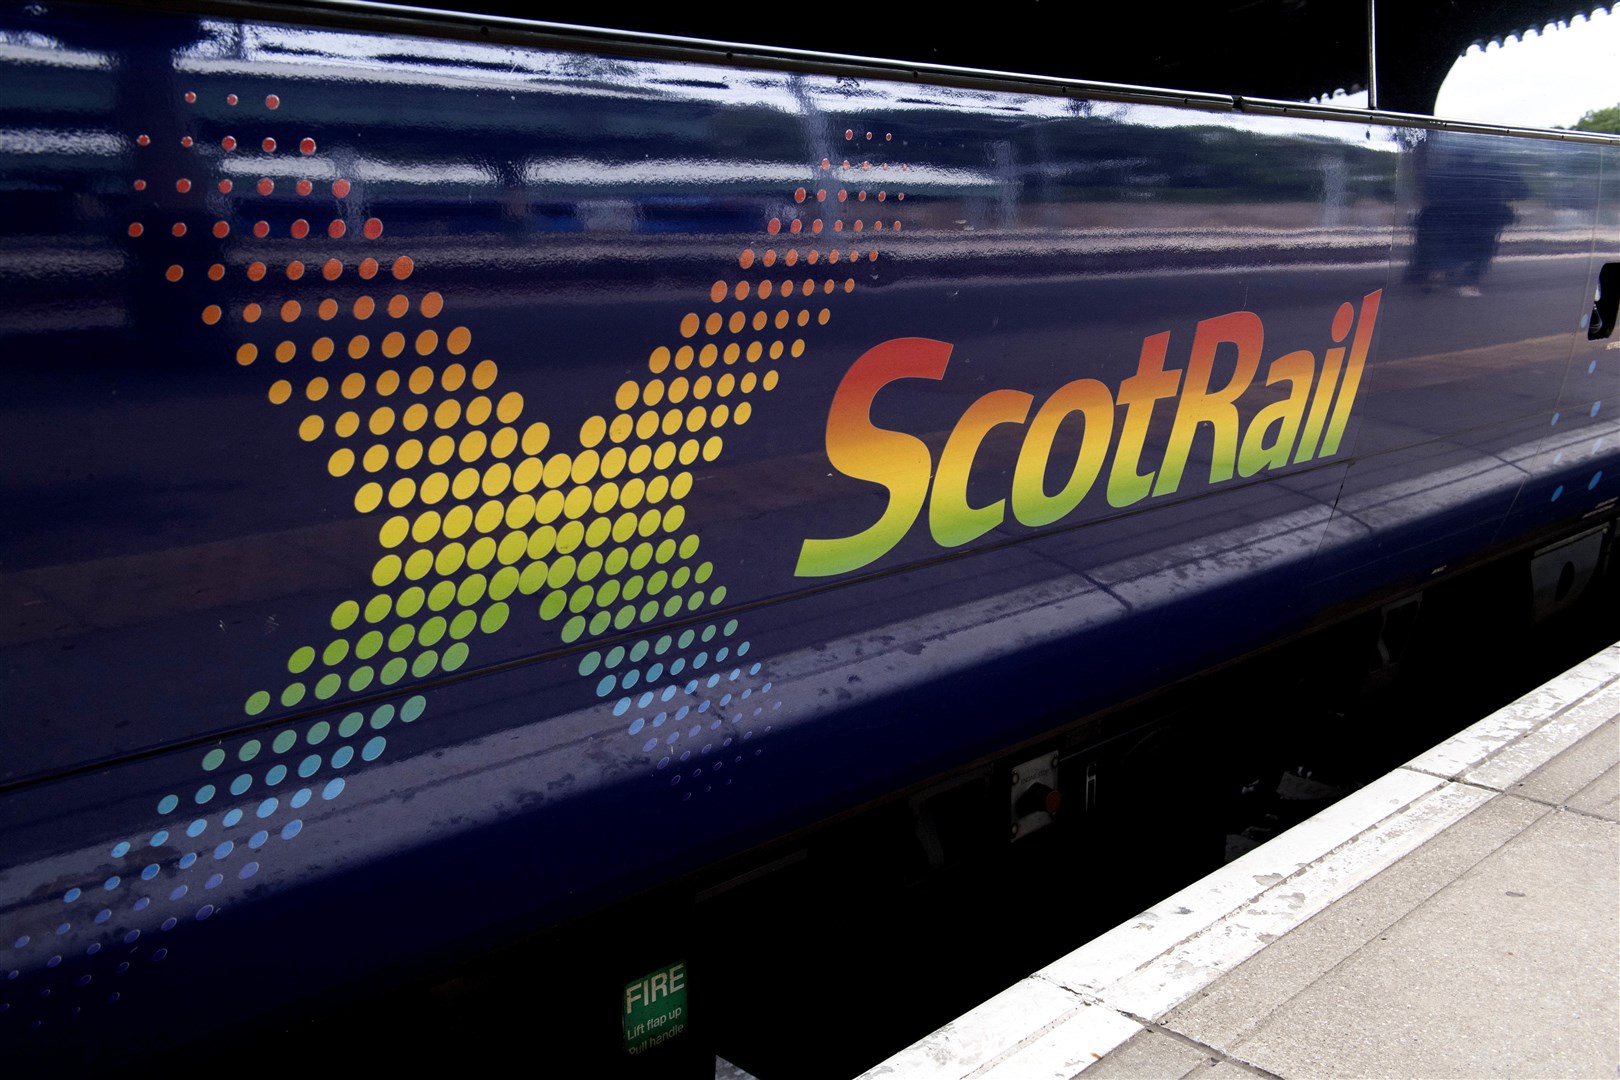 ScotRail has cancelled services on the Far North Line due to flooding.